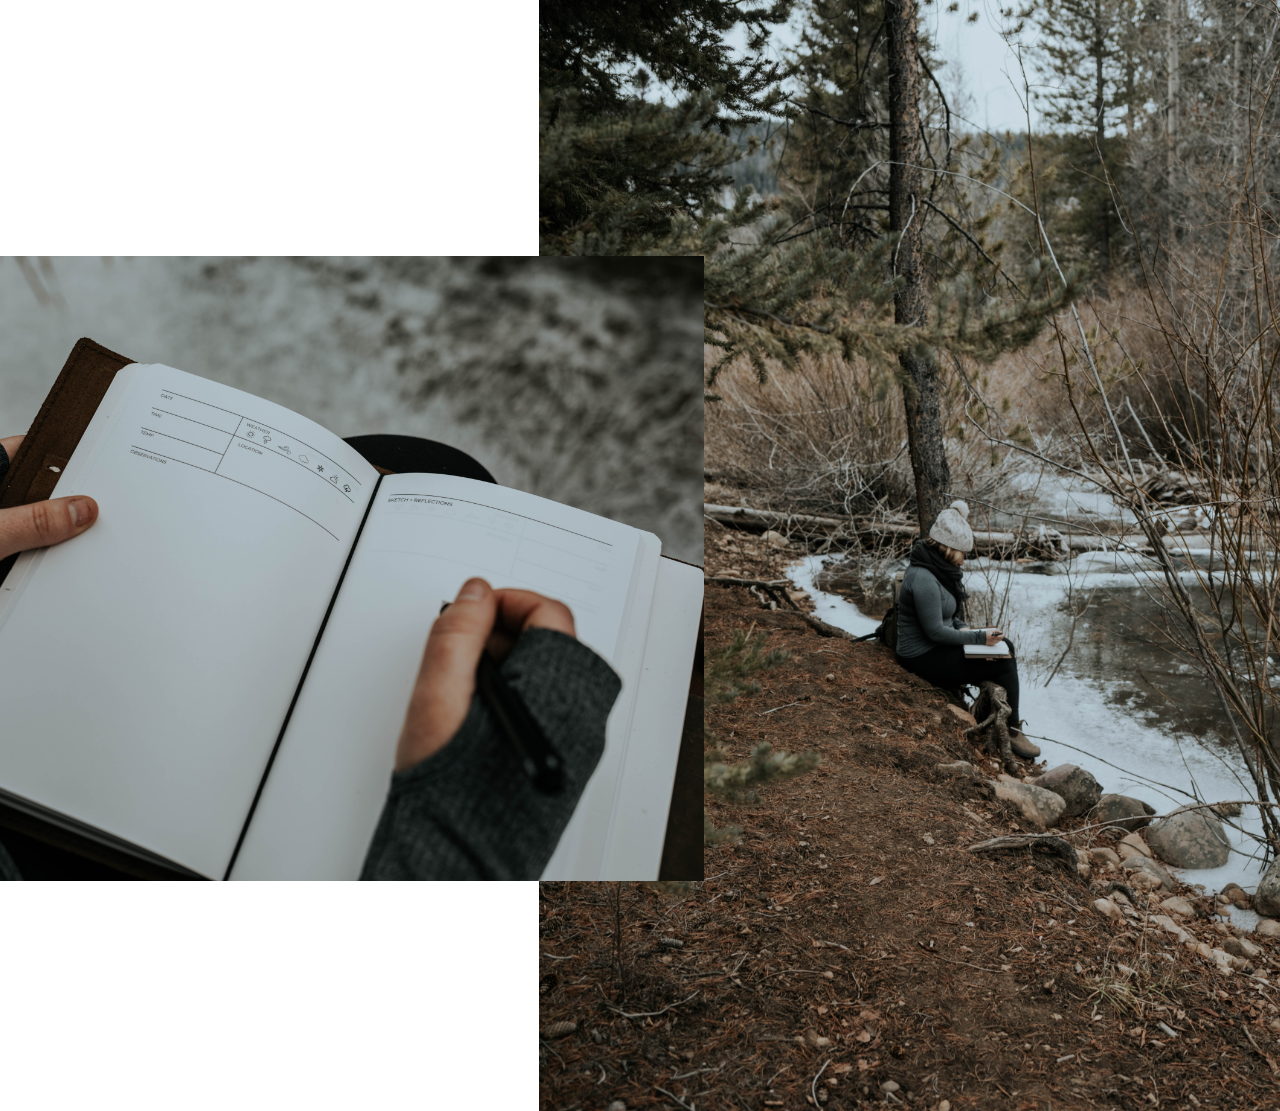 Keep a nature journal. A wonderful way to connect with nature through the seasons is to keep a nature journal. Take it with you on outings to record memorable plant and animal sightings. 